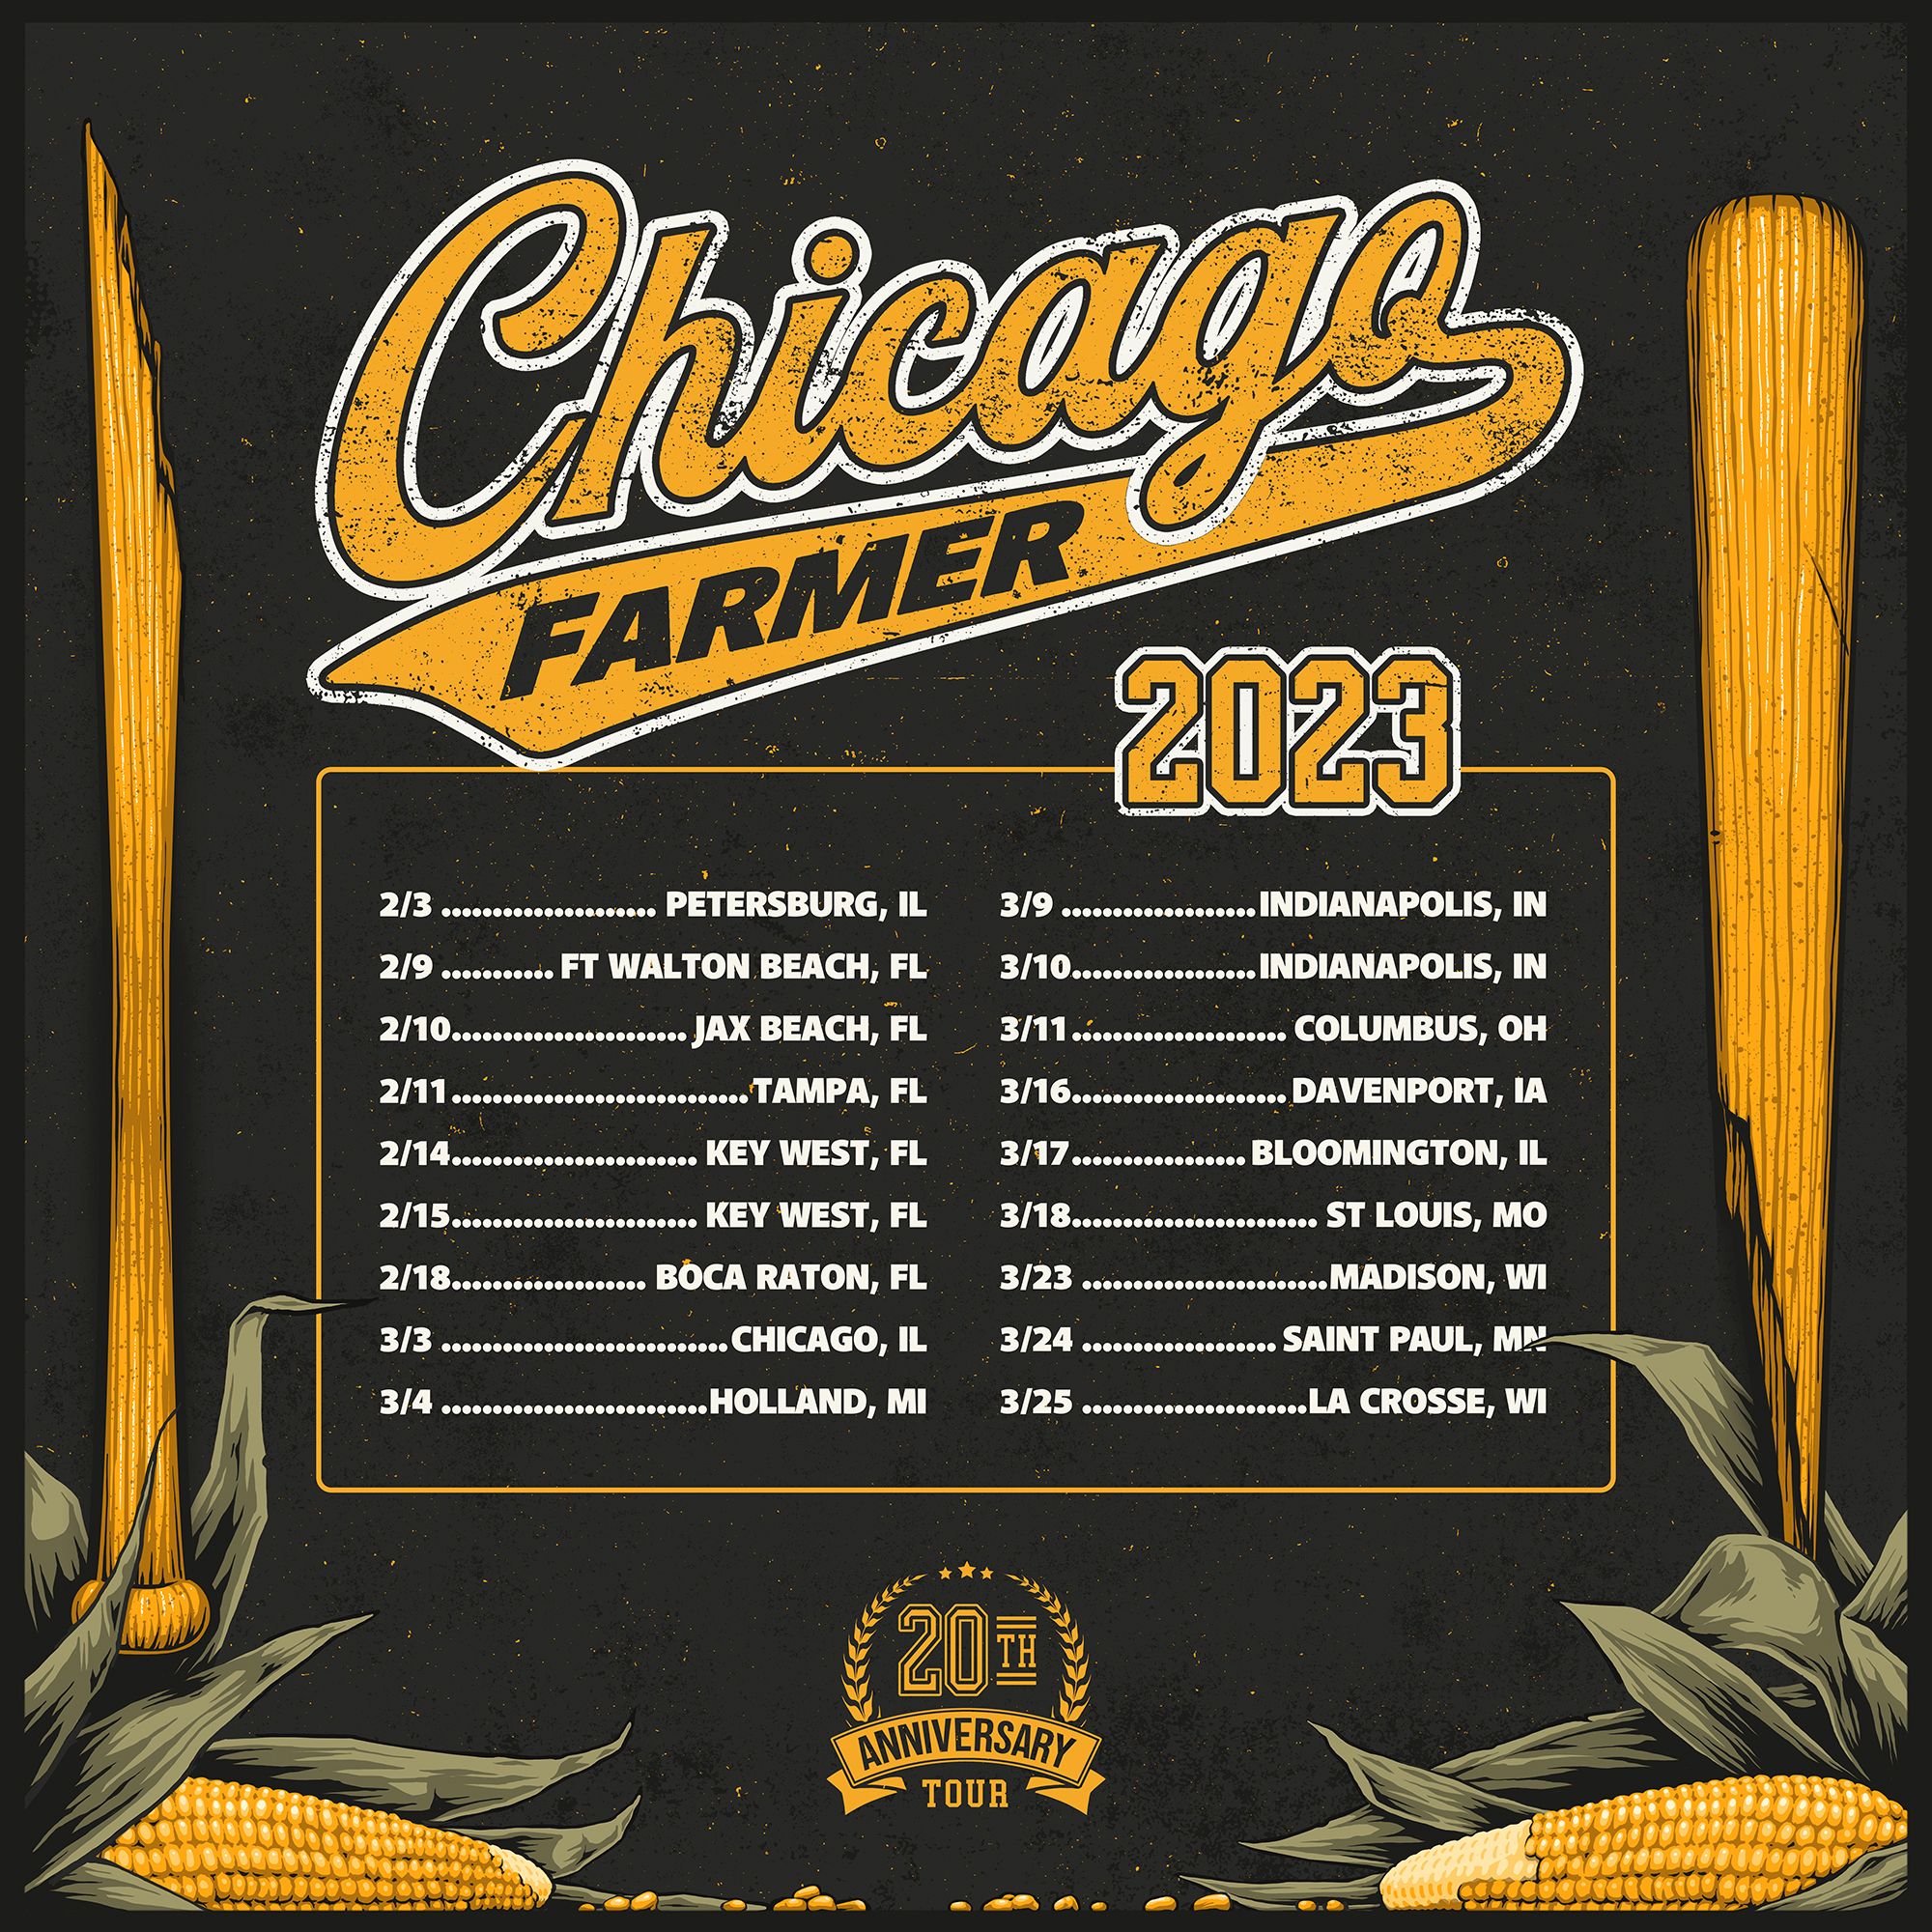 20 Years of Chicago Farmer Spring Tour